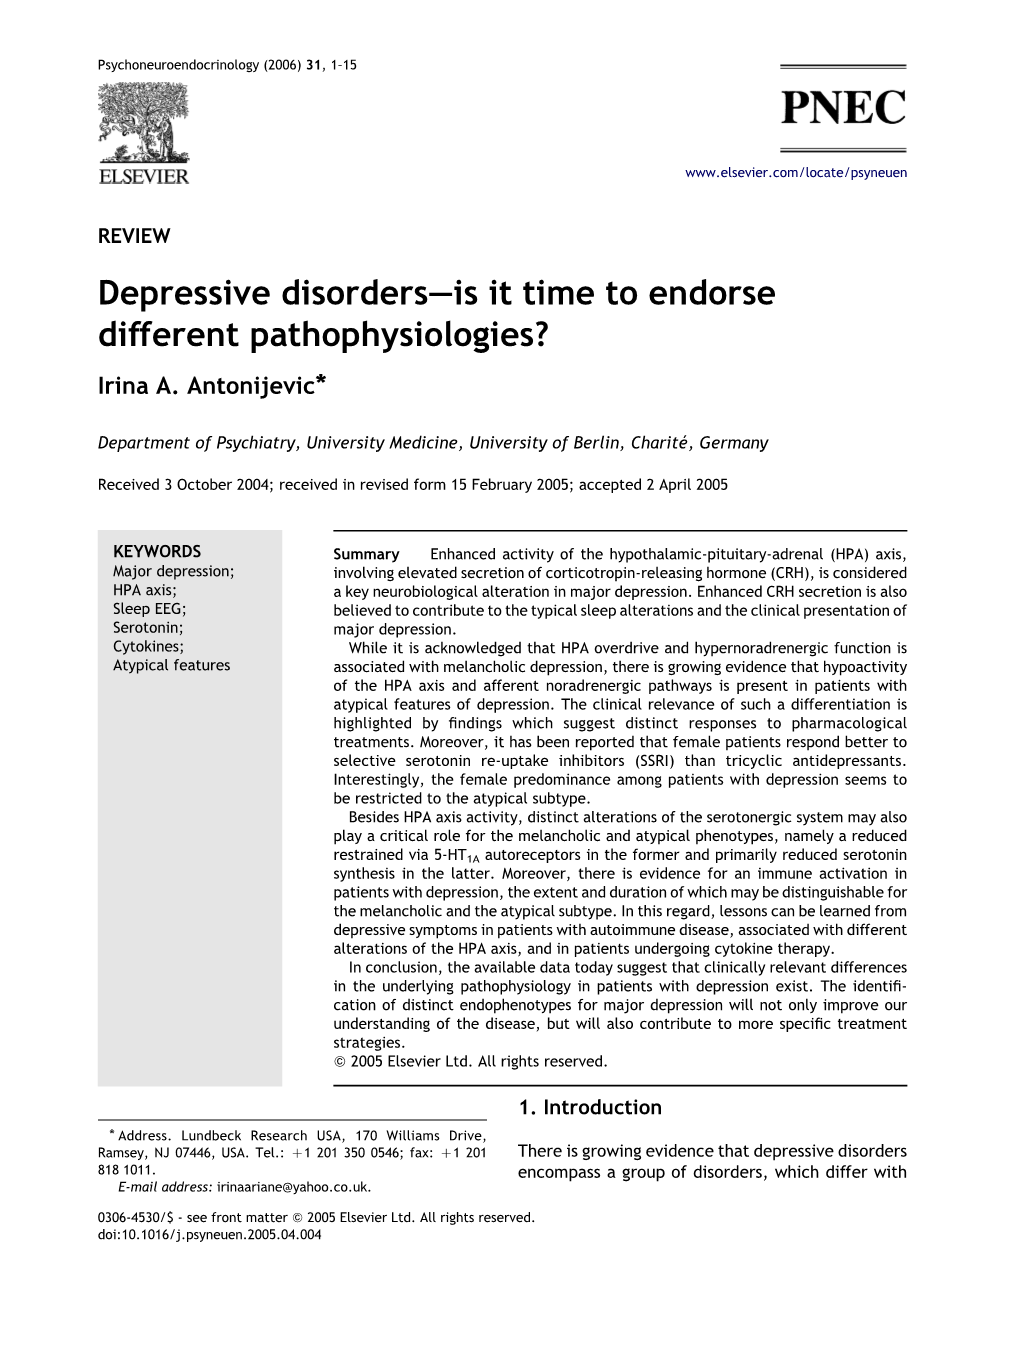 Depressive Disorders—Is It Time to Endorse Different Pathophysiologies? Irina A